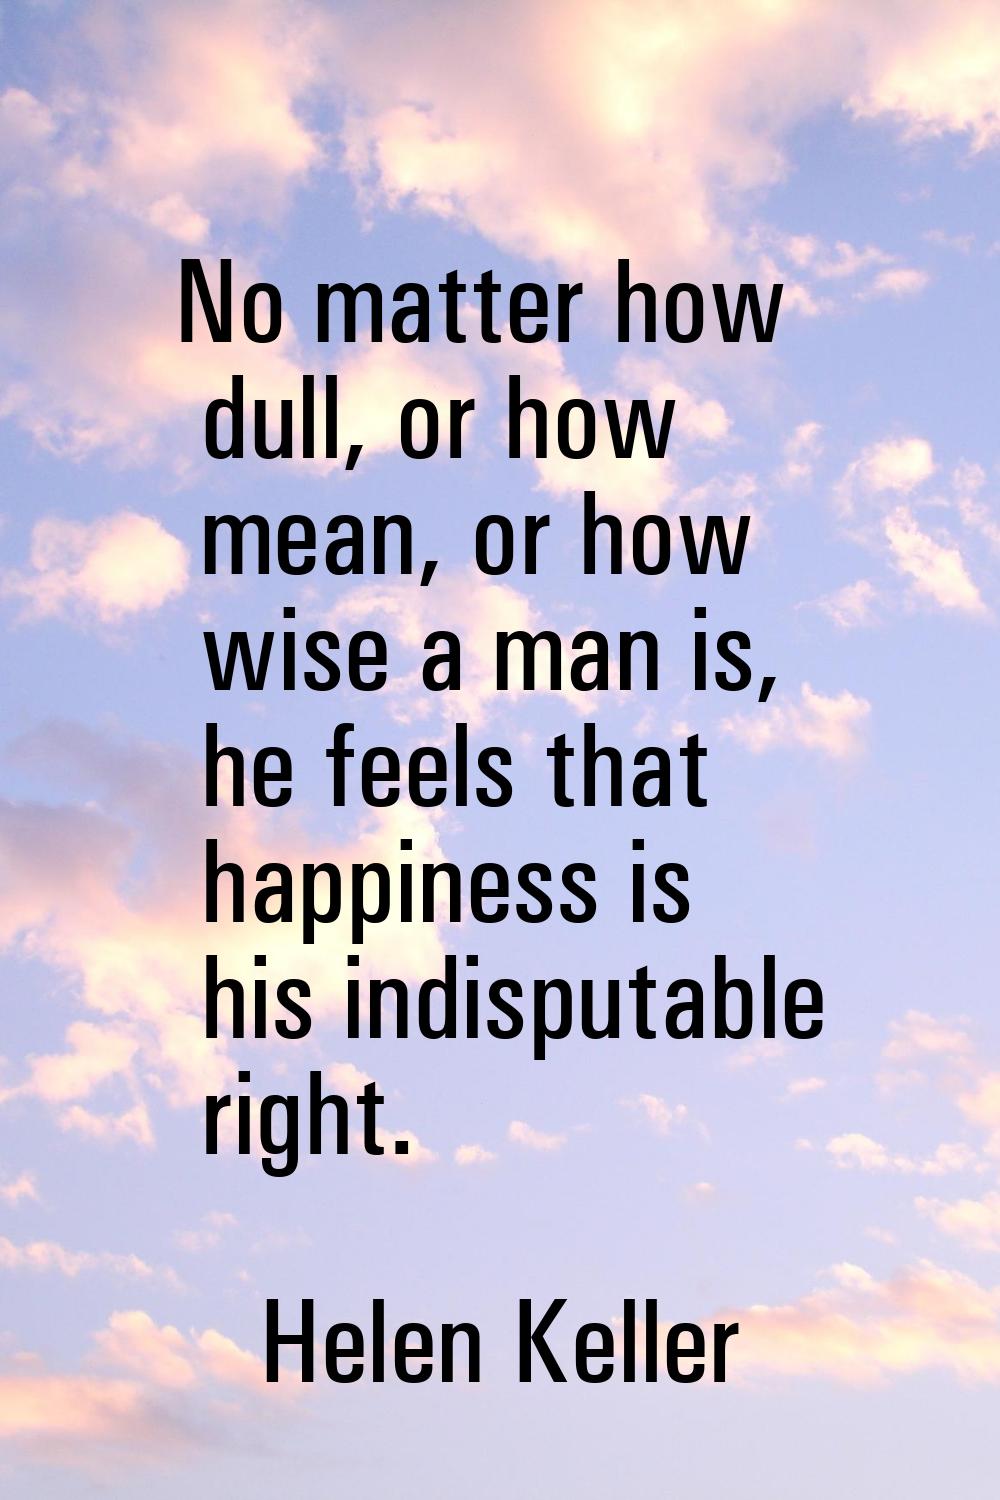 No matter how dull, or how mean, or how wise a man is, he feels that happiness is his indisputable 